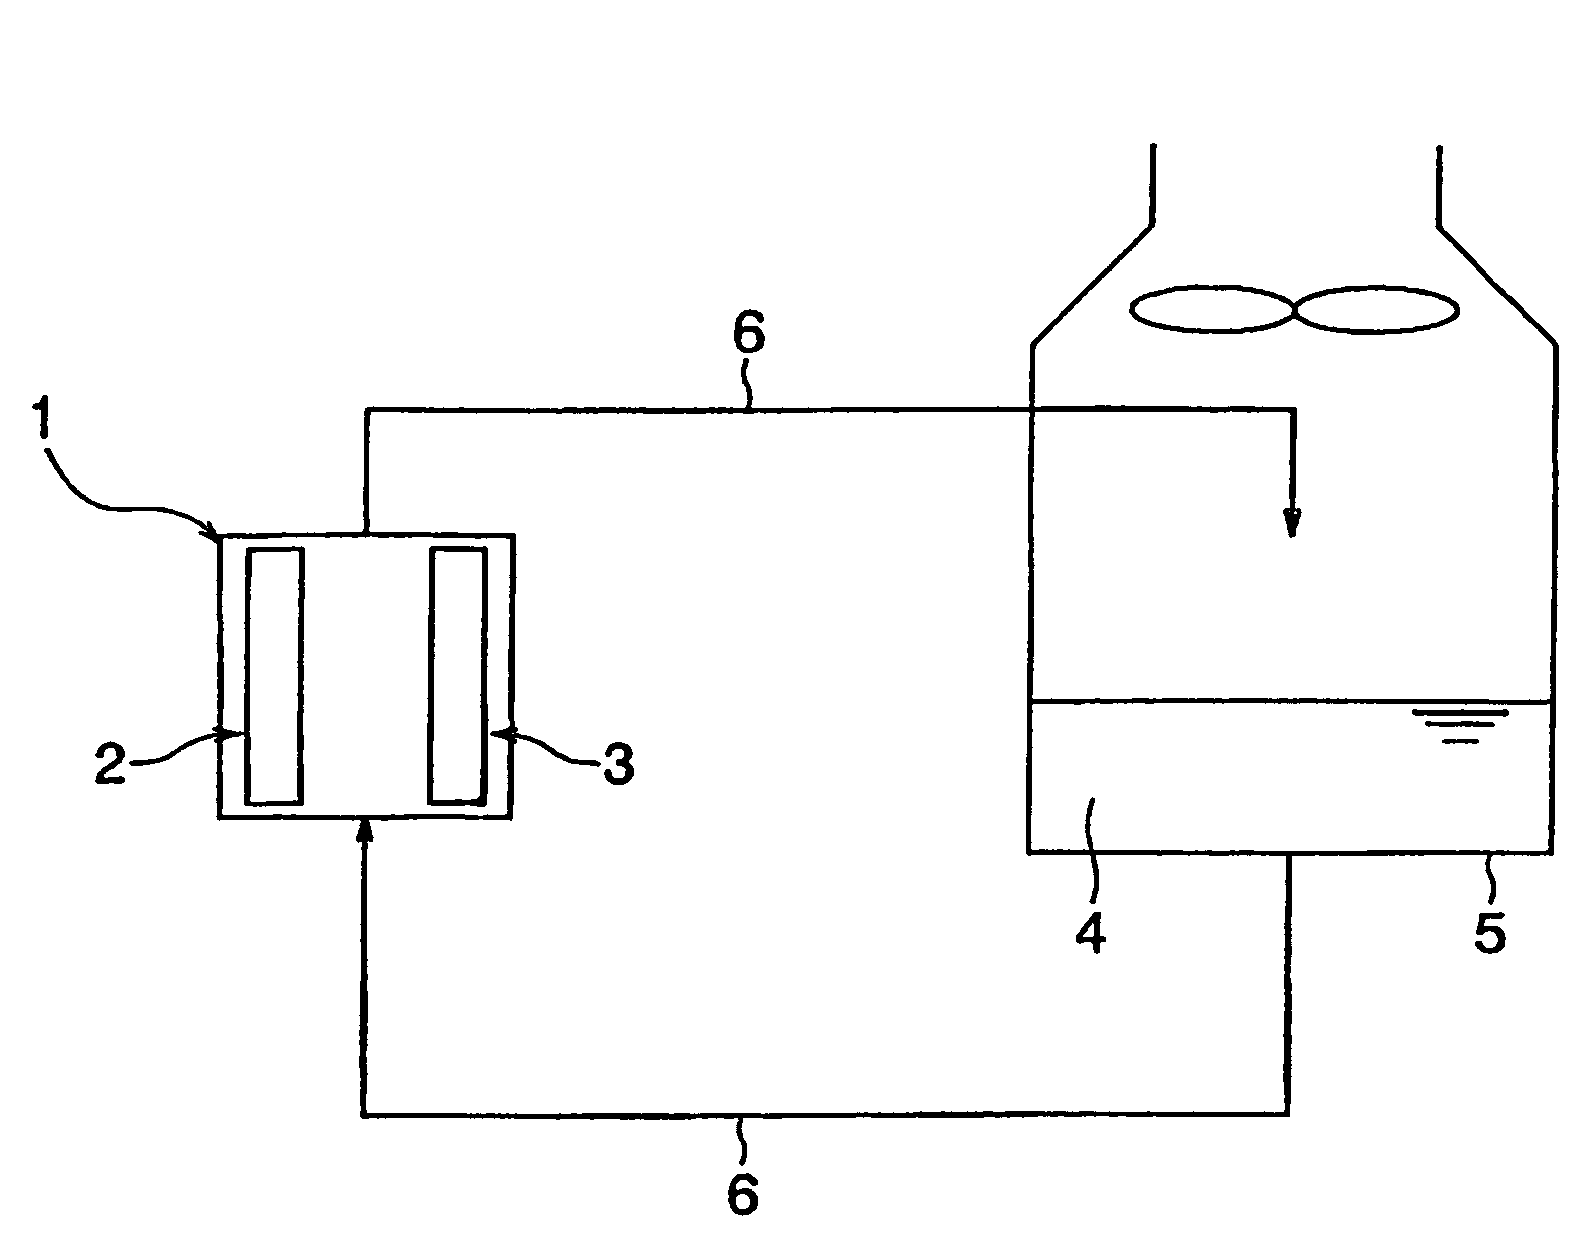 Electrochemical sterilizing and bacteriostatic method